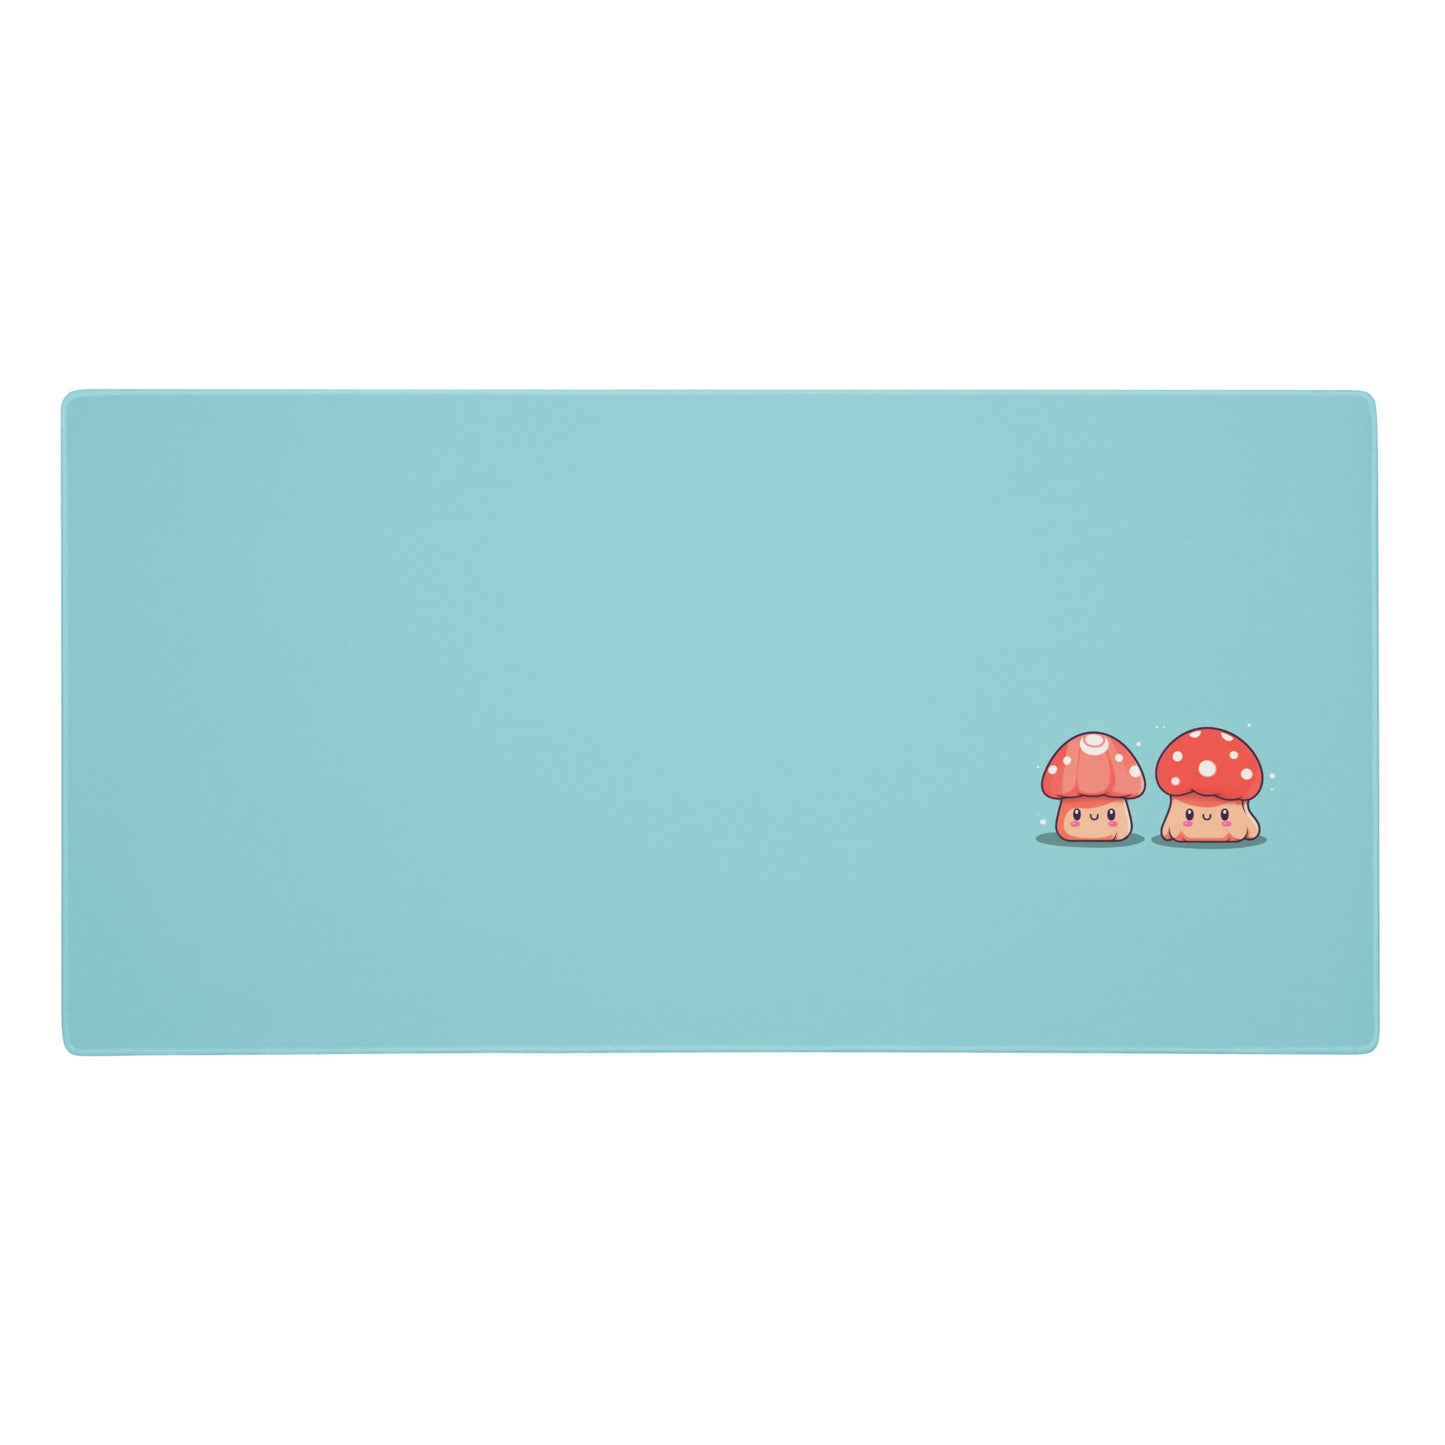 A gaming desk pad with two kawaii mushrooms on a blue background.